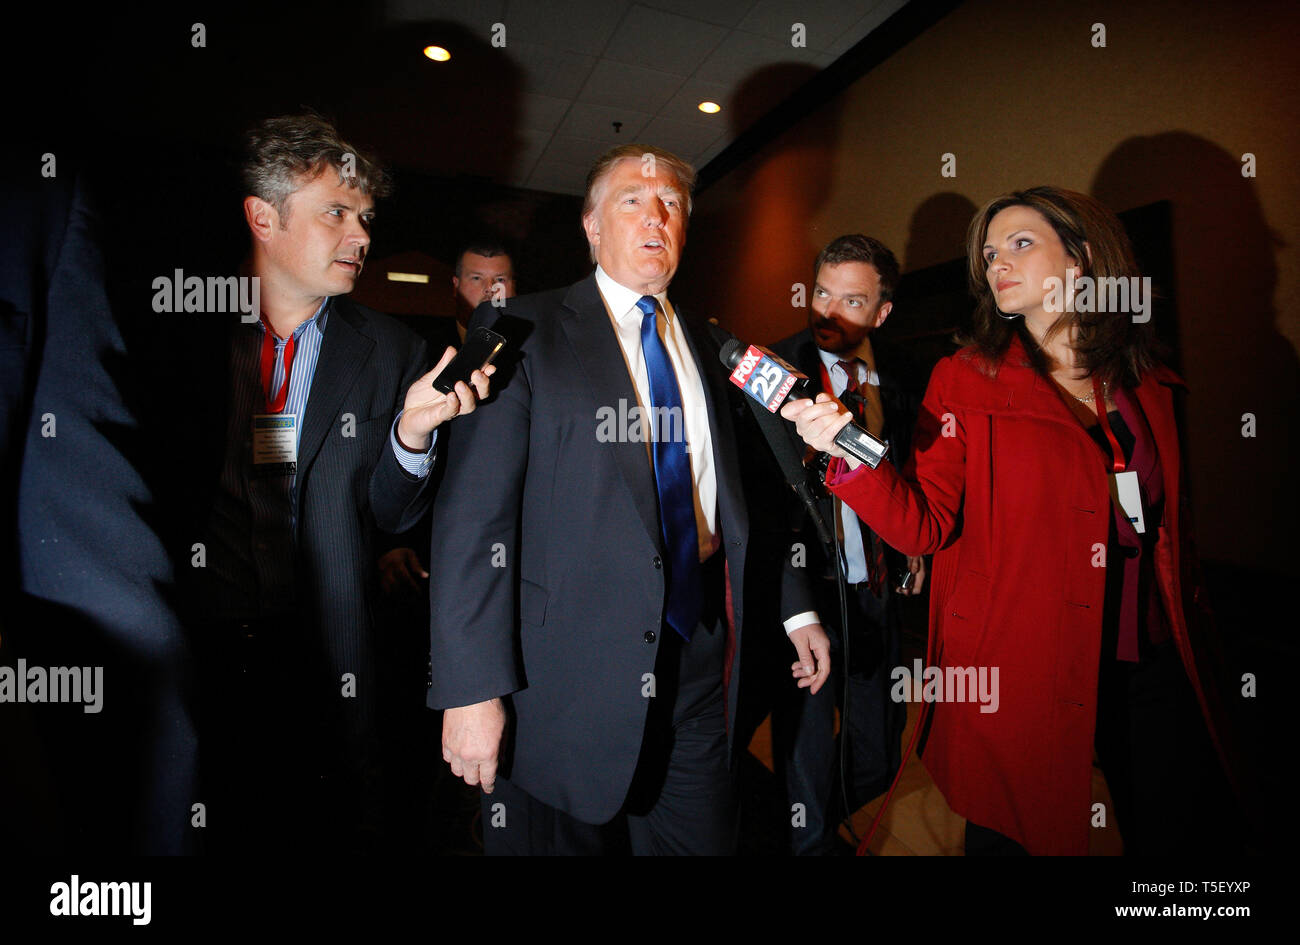 Real Estater and TV Entertainer Donald J. Trump is flirting with the idea of running for President in the 2012 Election. Wednesday he made an important visit with the Nashua Chamber of Commerce in New Hampshire. Stock Photo